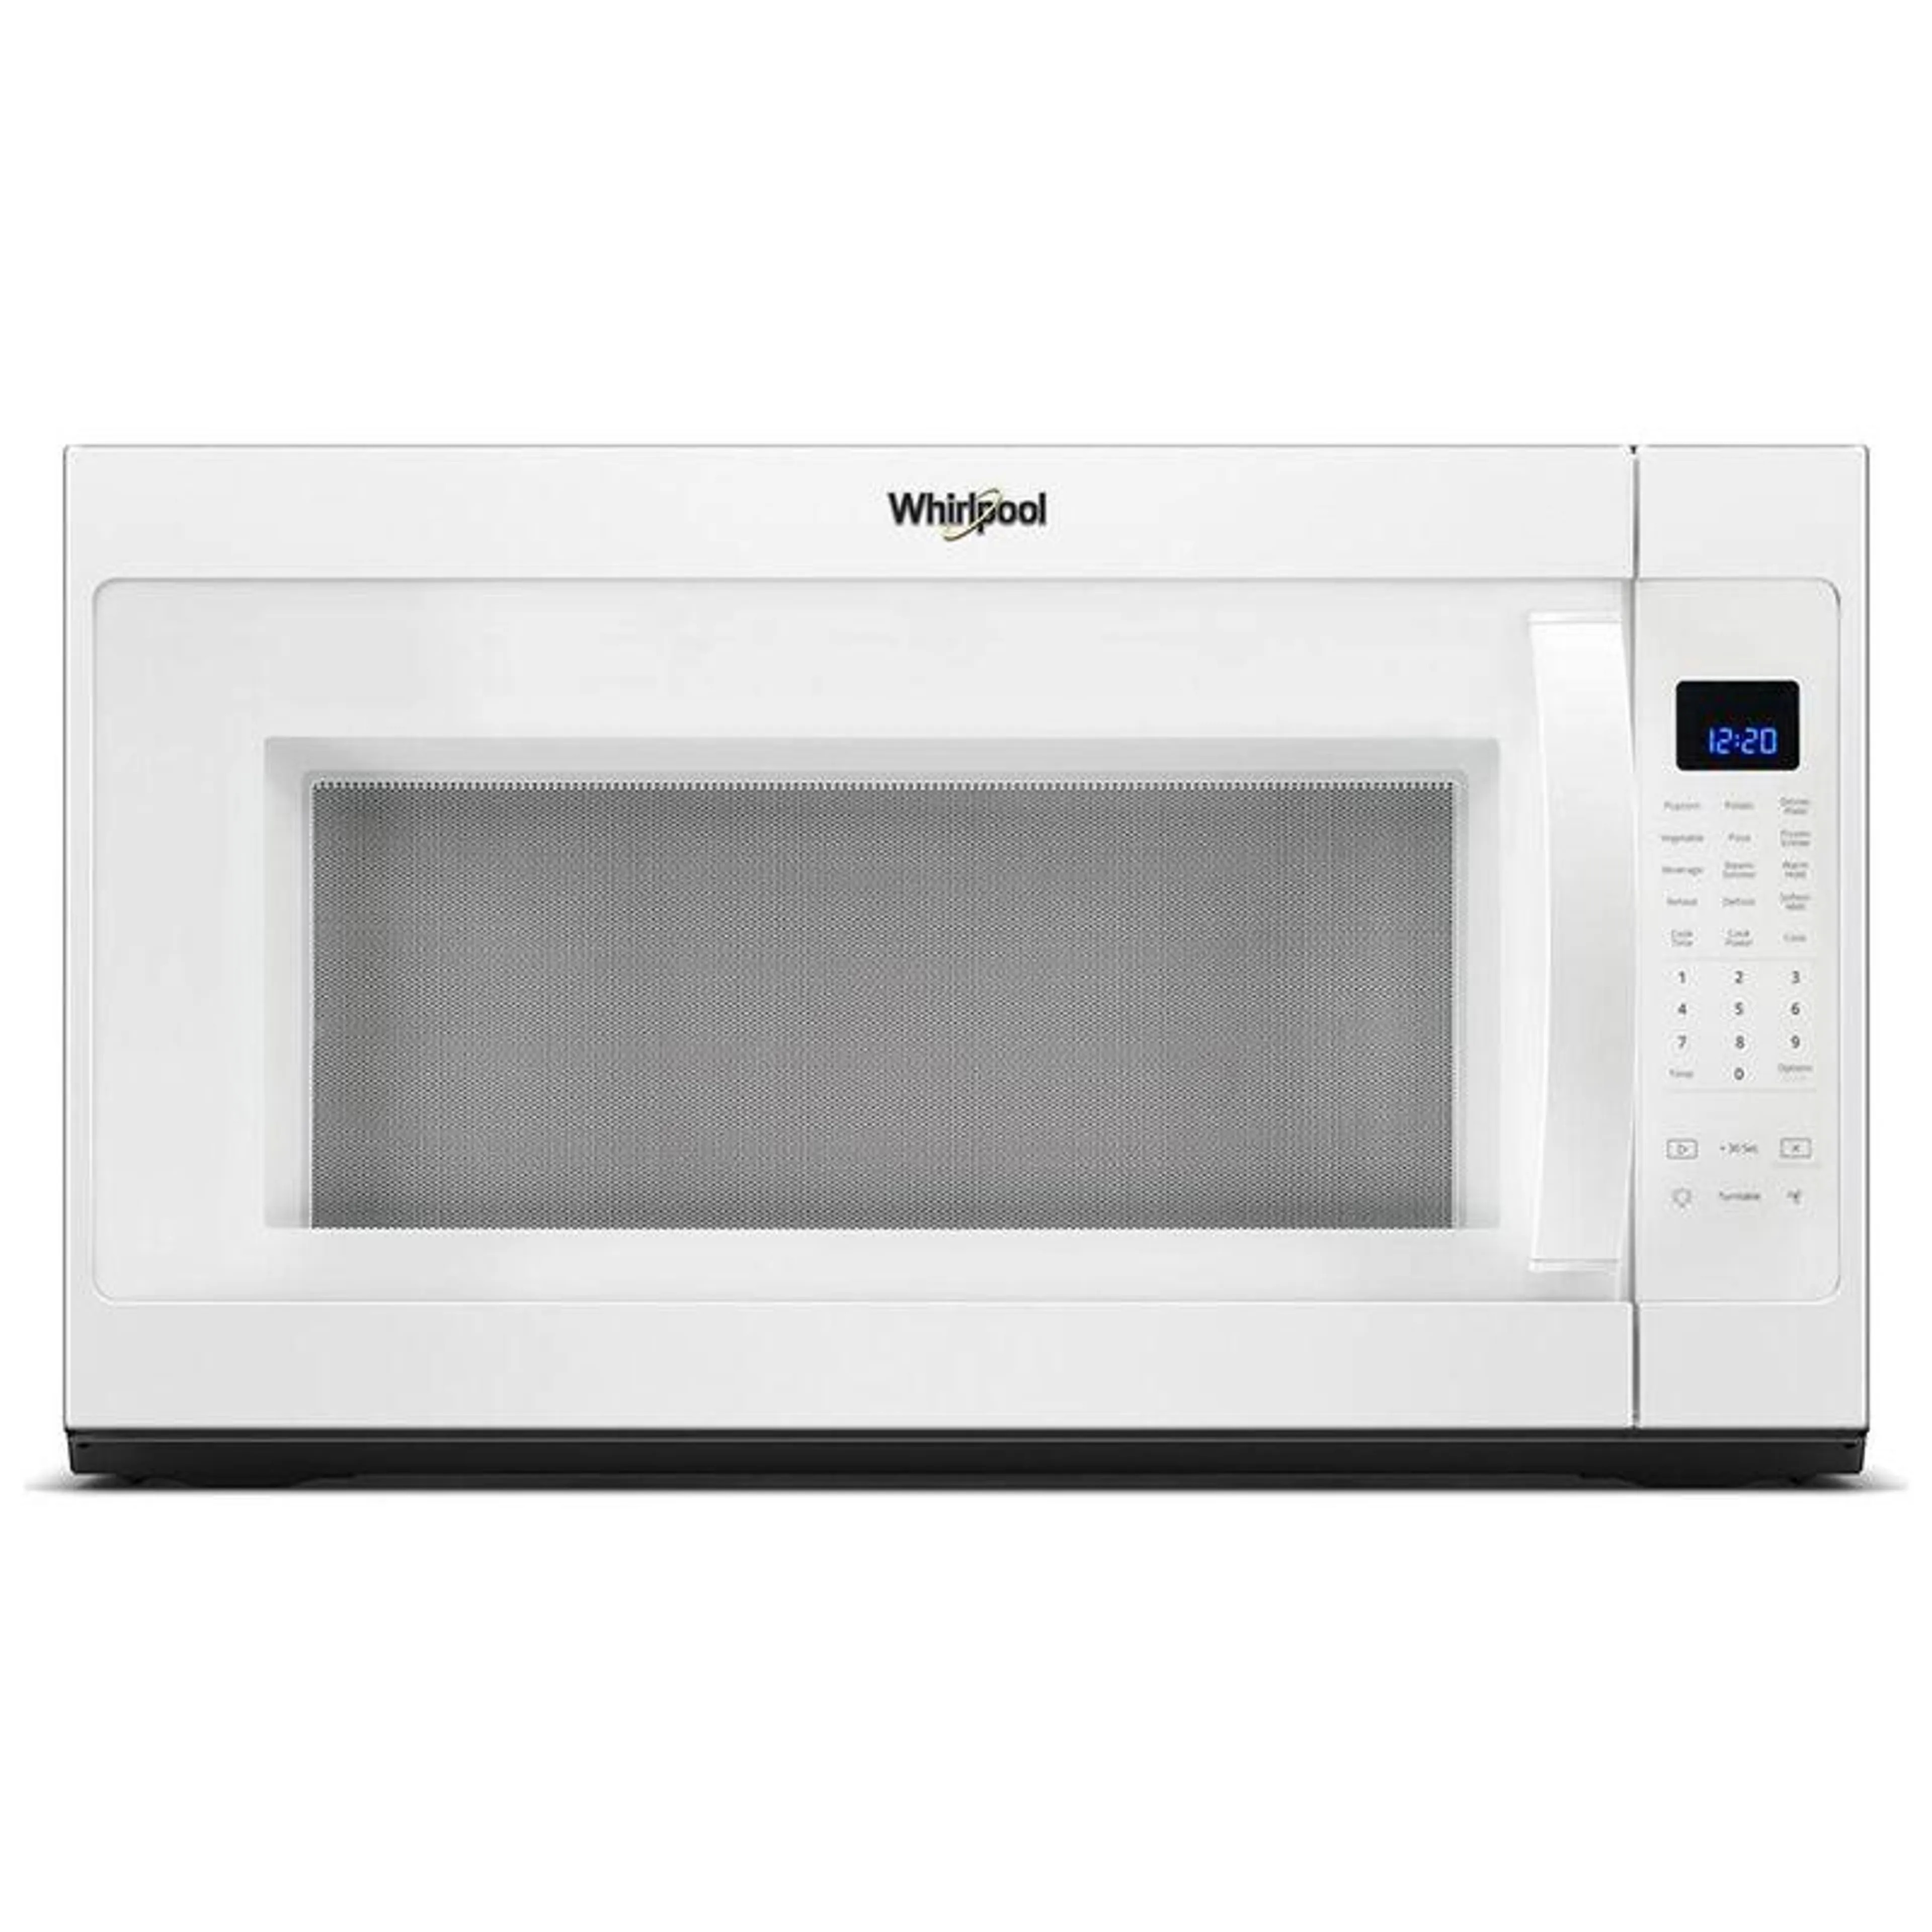 Whirlpool 30" 2.1 Cu. Ft. Over-the-Range Microwave with 10 Power Levels, 400 CFM & Sensor Cooking Controls - White